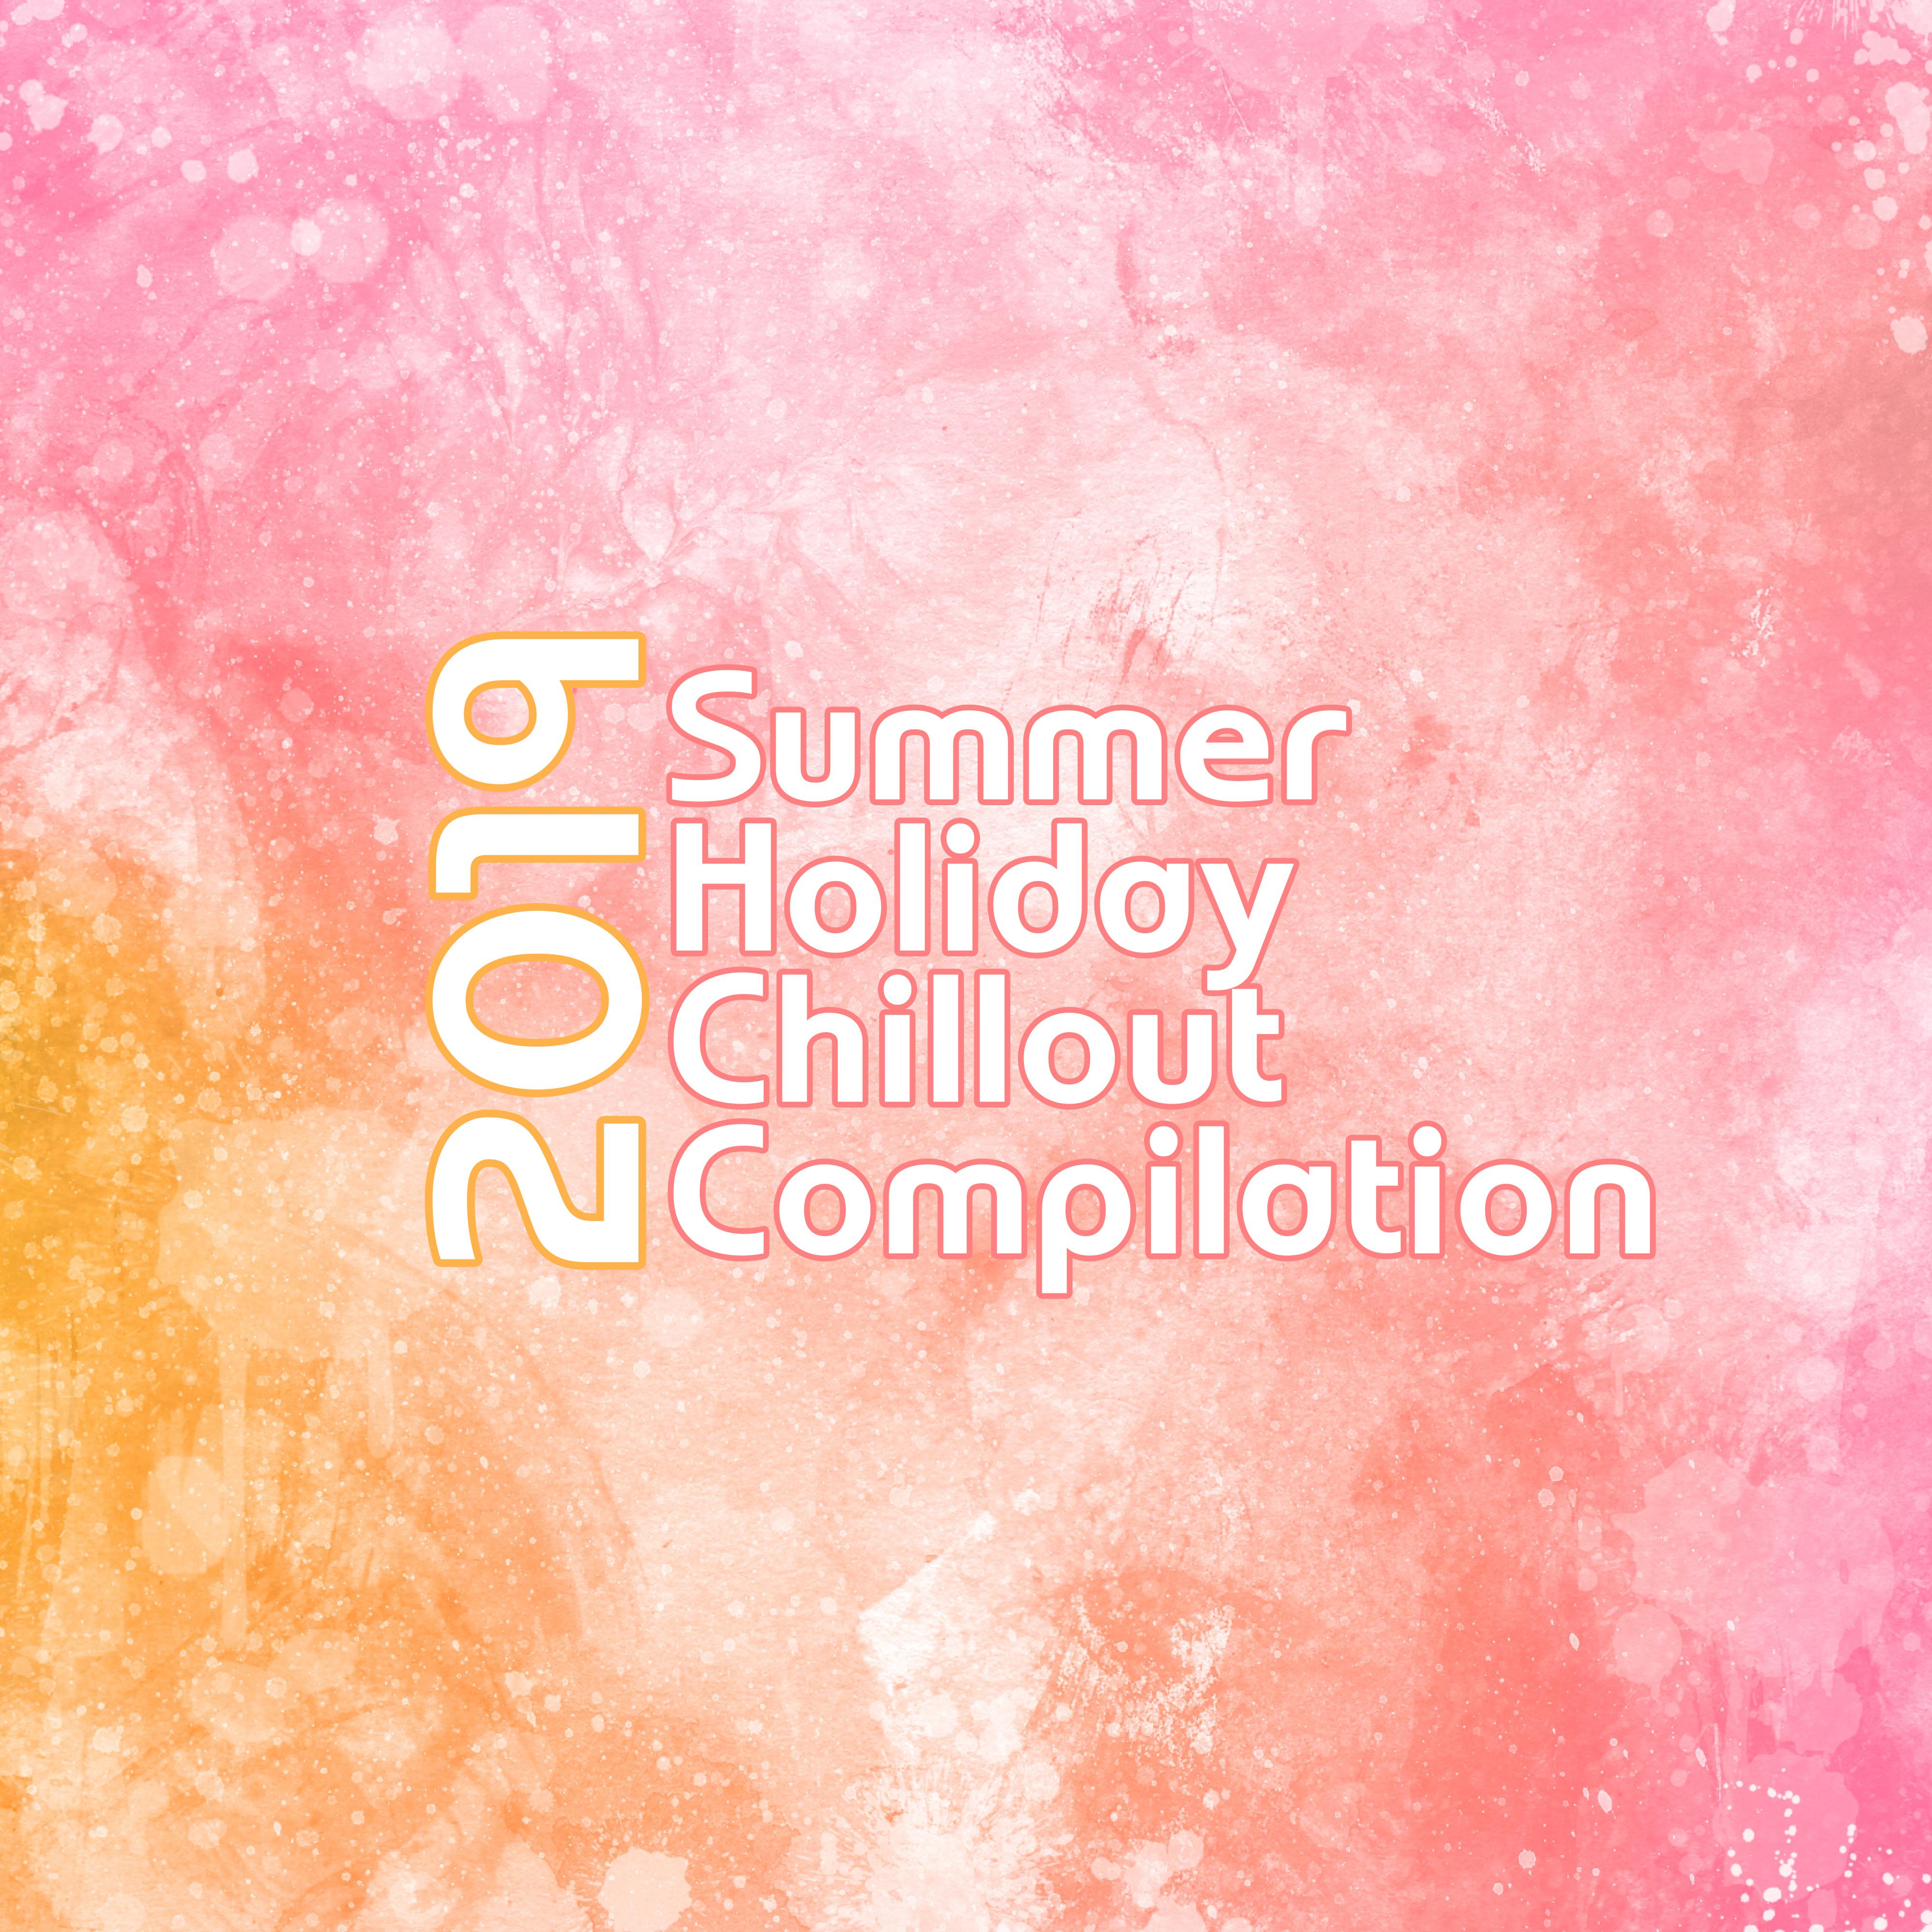 2019 Summer Holiday Chillout Compilation